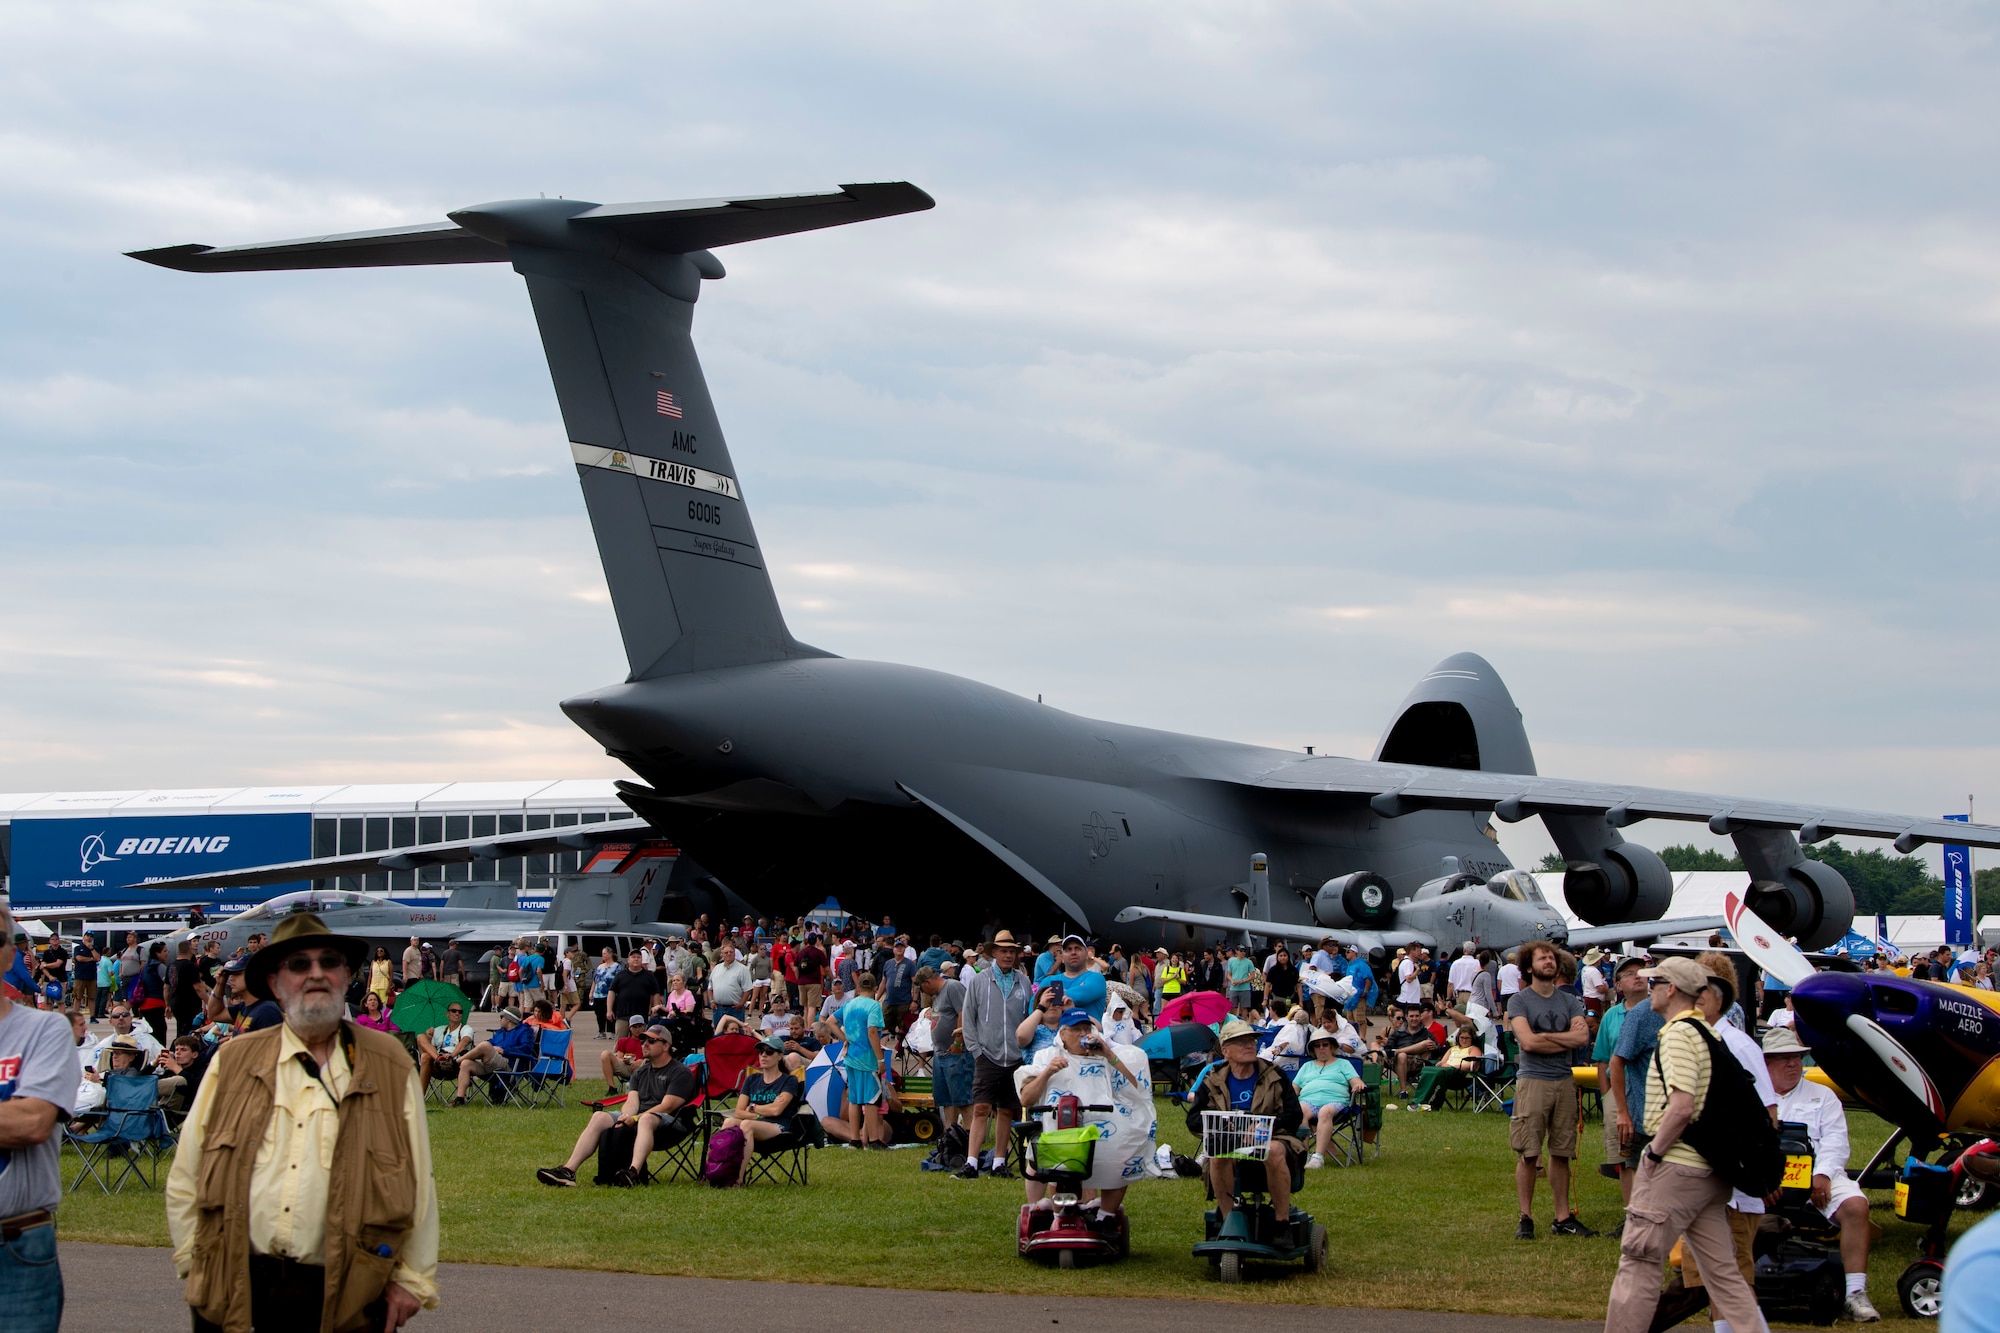 EAA AirVenture attendees watch the airshow in front of a C-5M Super Galaxy July 26, 2019, at Whitman Regional Airport in Oshkosh, Wisconsin. The C-5 crew went to EAA AirVenture 2019 where more than 500,000 aviation enthusiasts from 80 countries gathered at the air show to celebrate the past, present and future in the world of aviation. (U.S. Air Force photo by Senior Airman Jonathon Carnell)